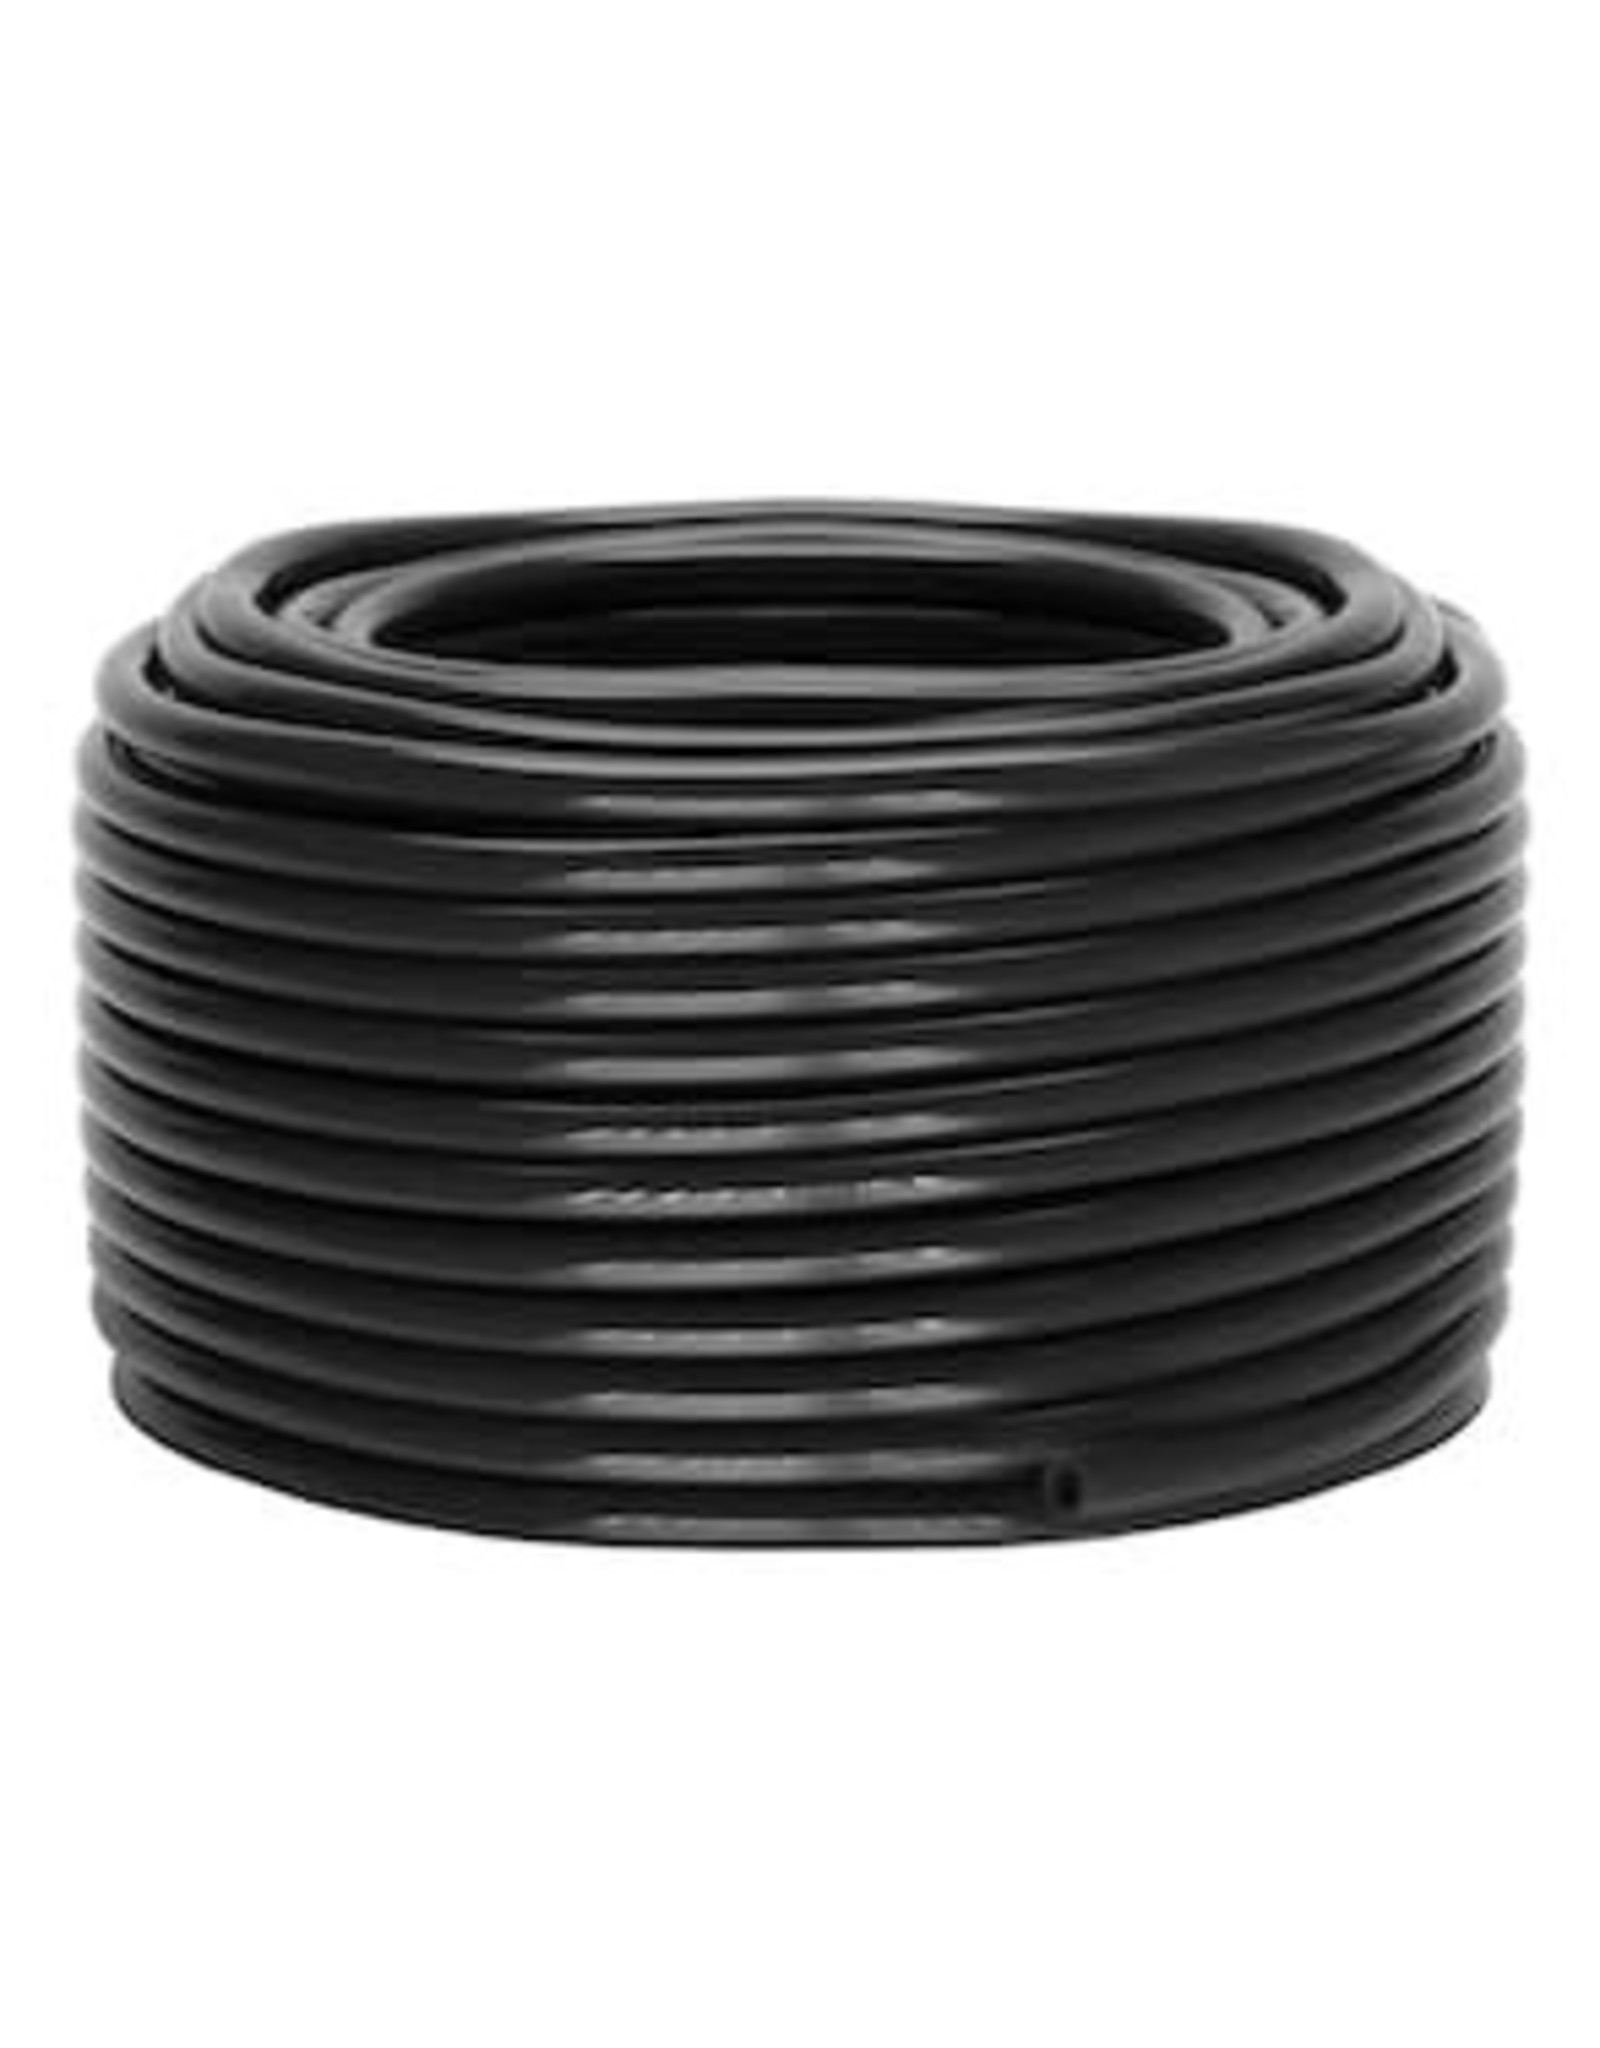 Grow1 Grow1 Black Vinyl Tubing I.D. 3/4''  (Sold By The Foot)